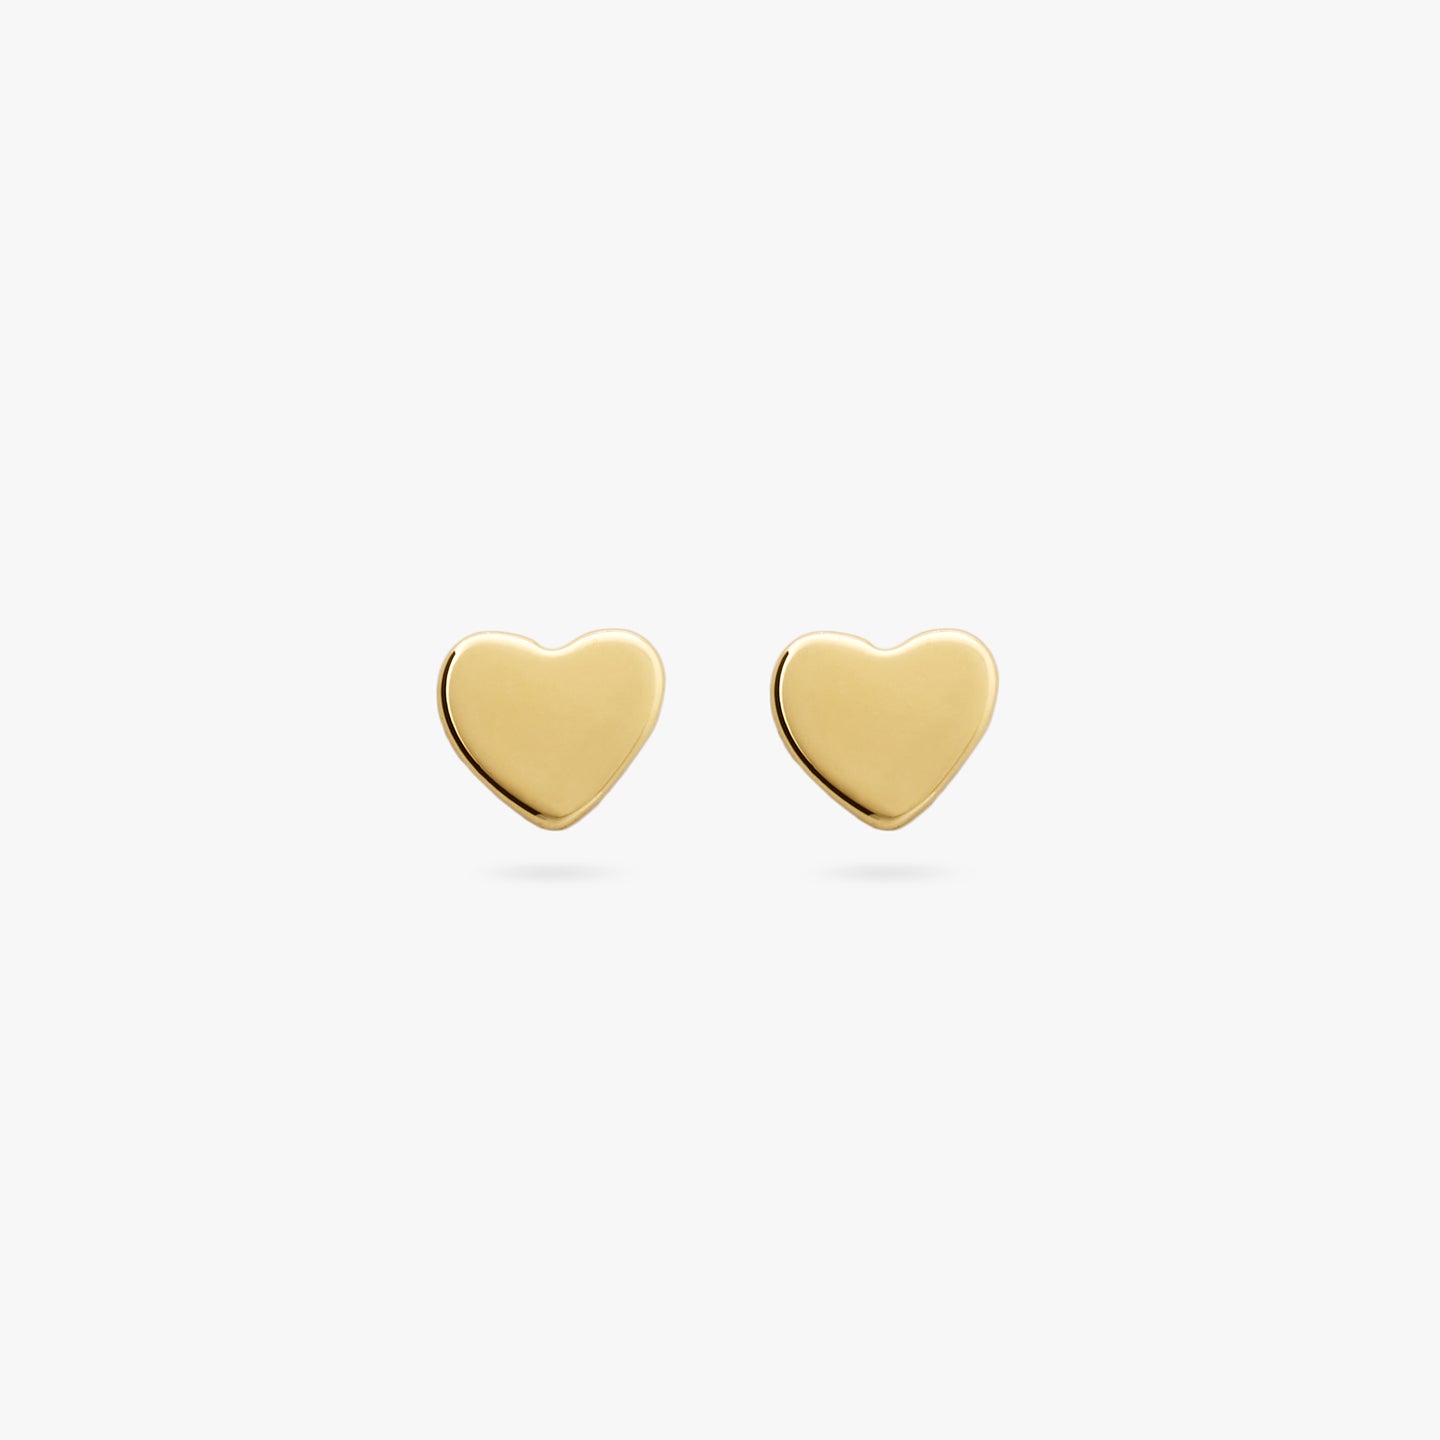 This is a pair of small gold studs in the shape of a heart [pair] color:null|gold